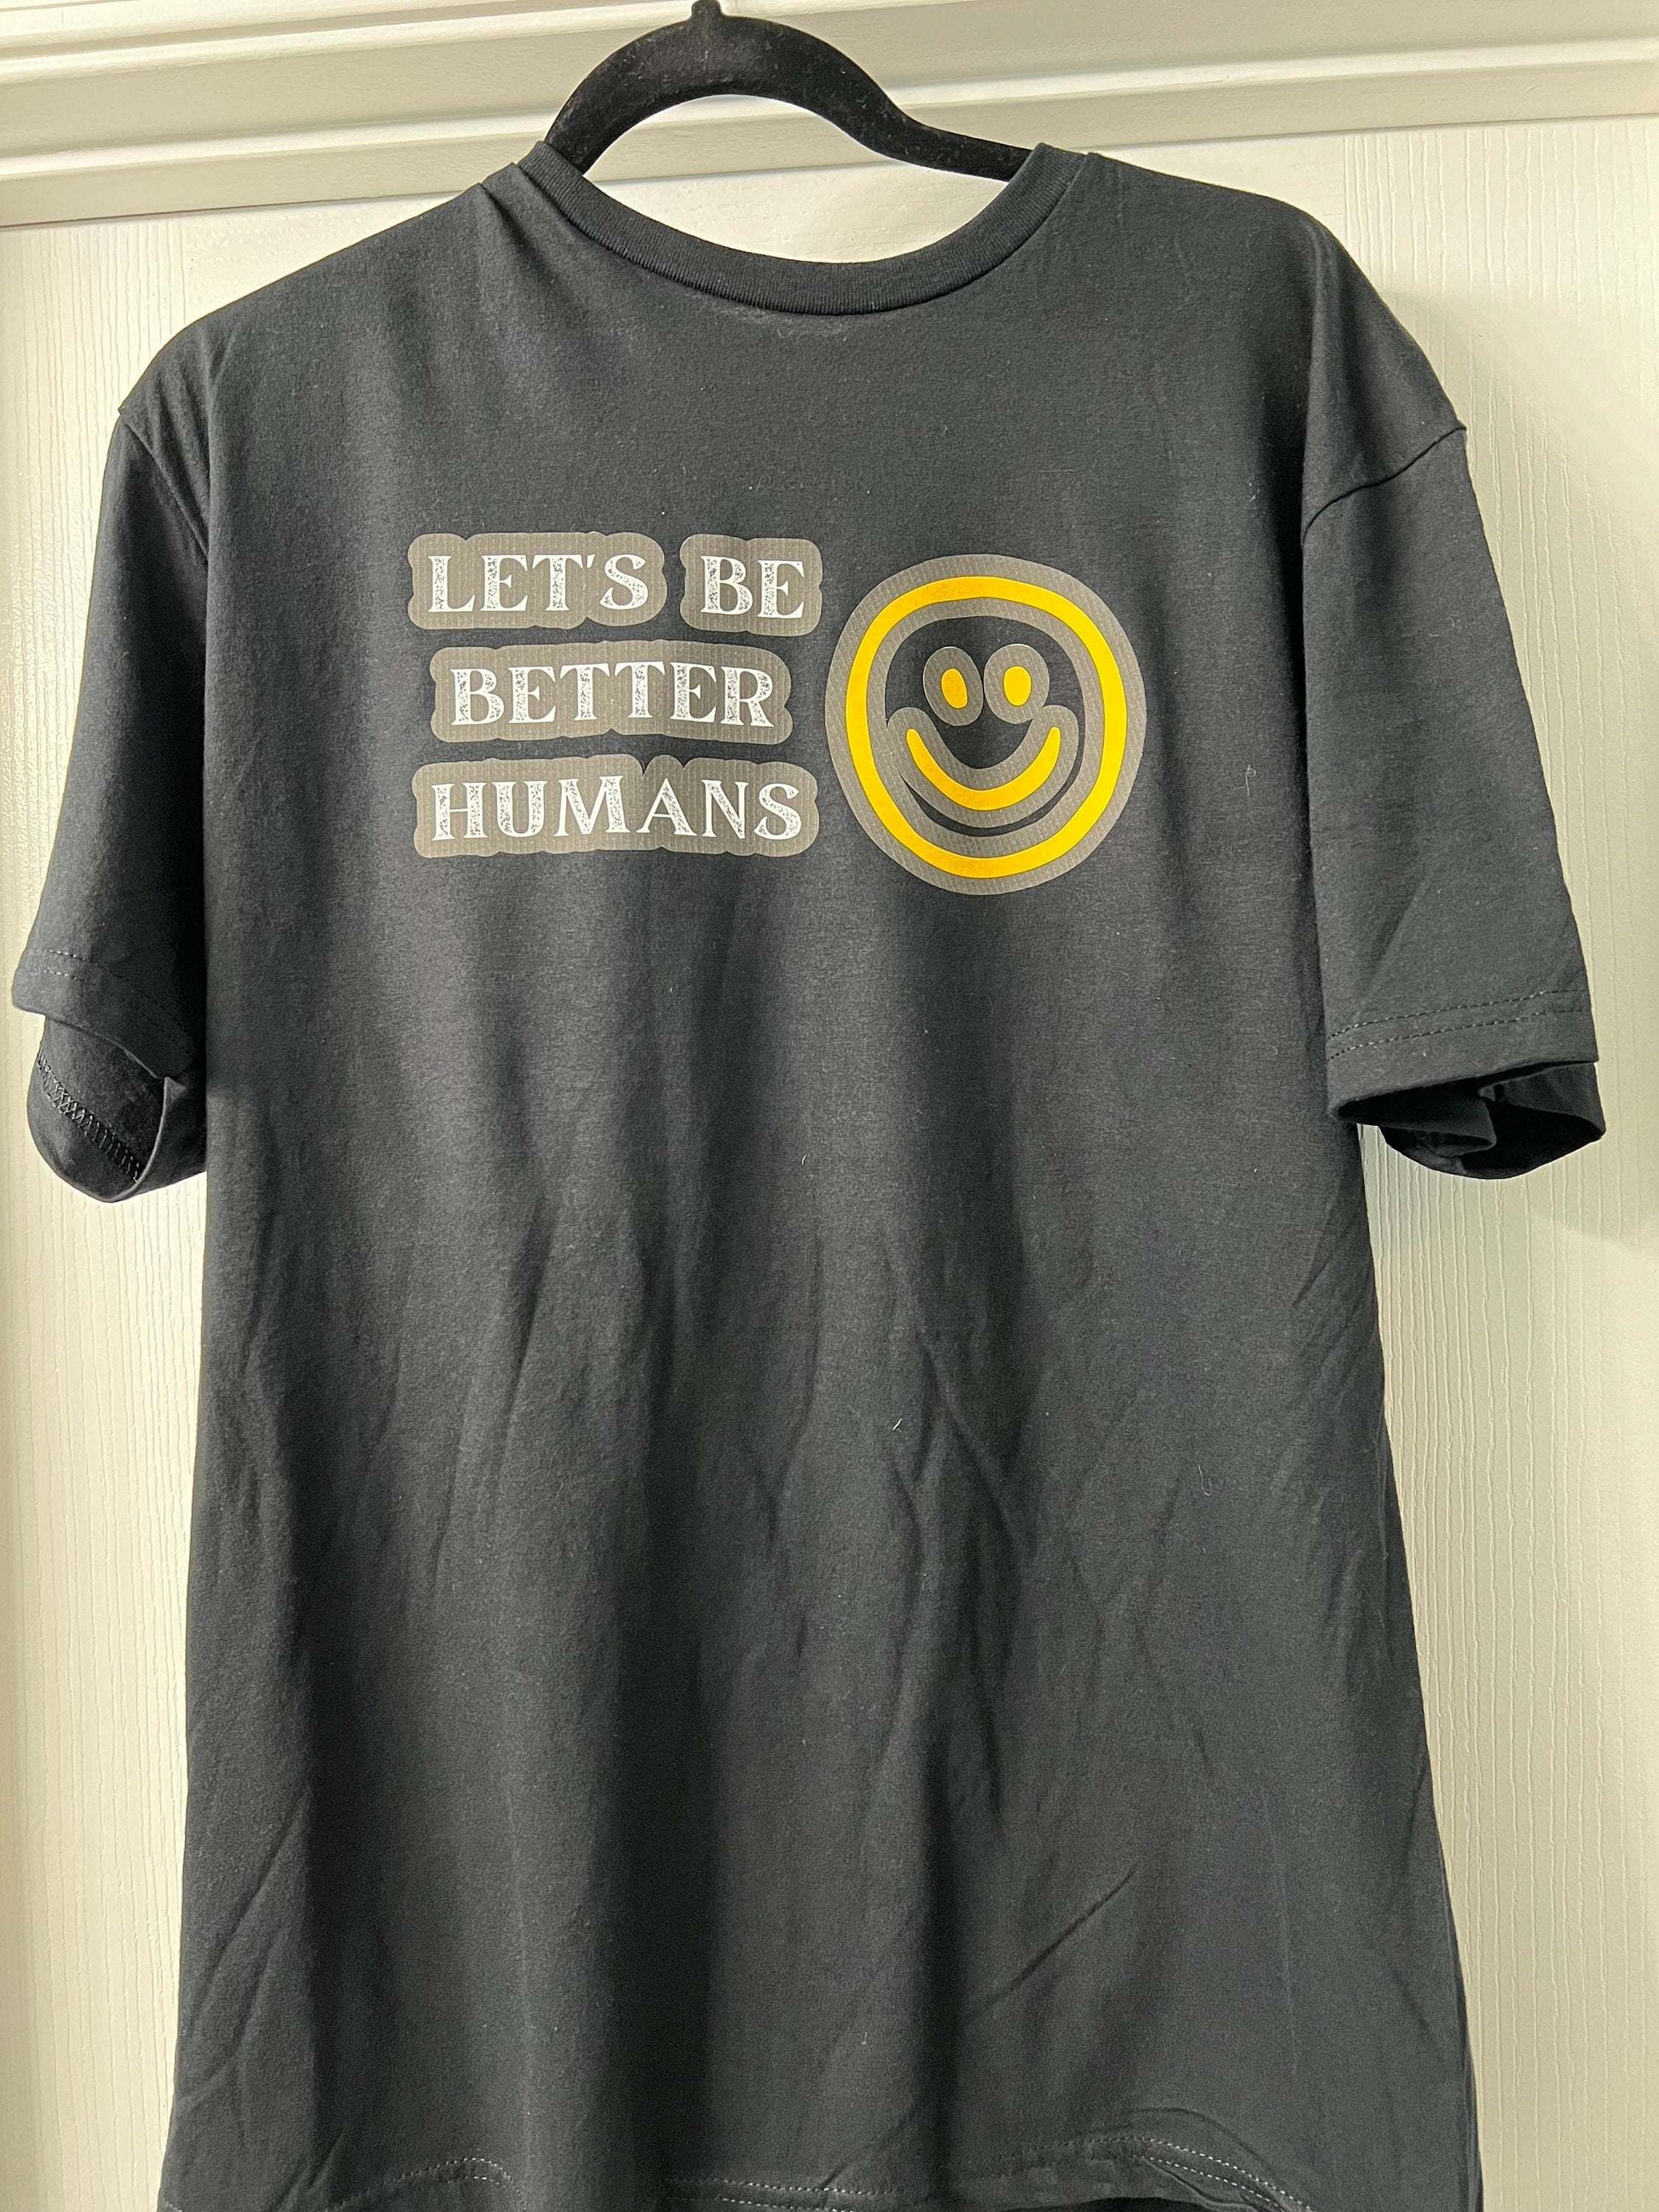 Let’s be better humans t shirt with smiley face